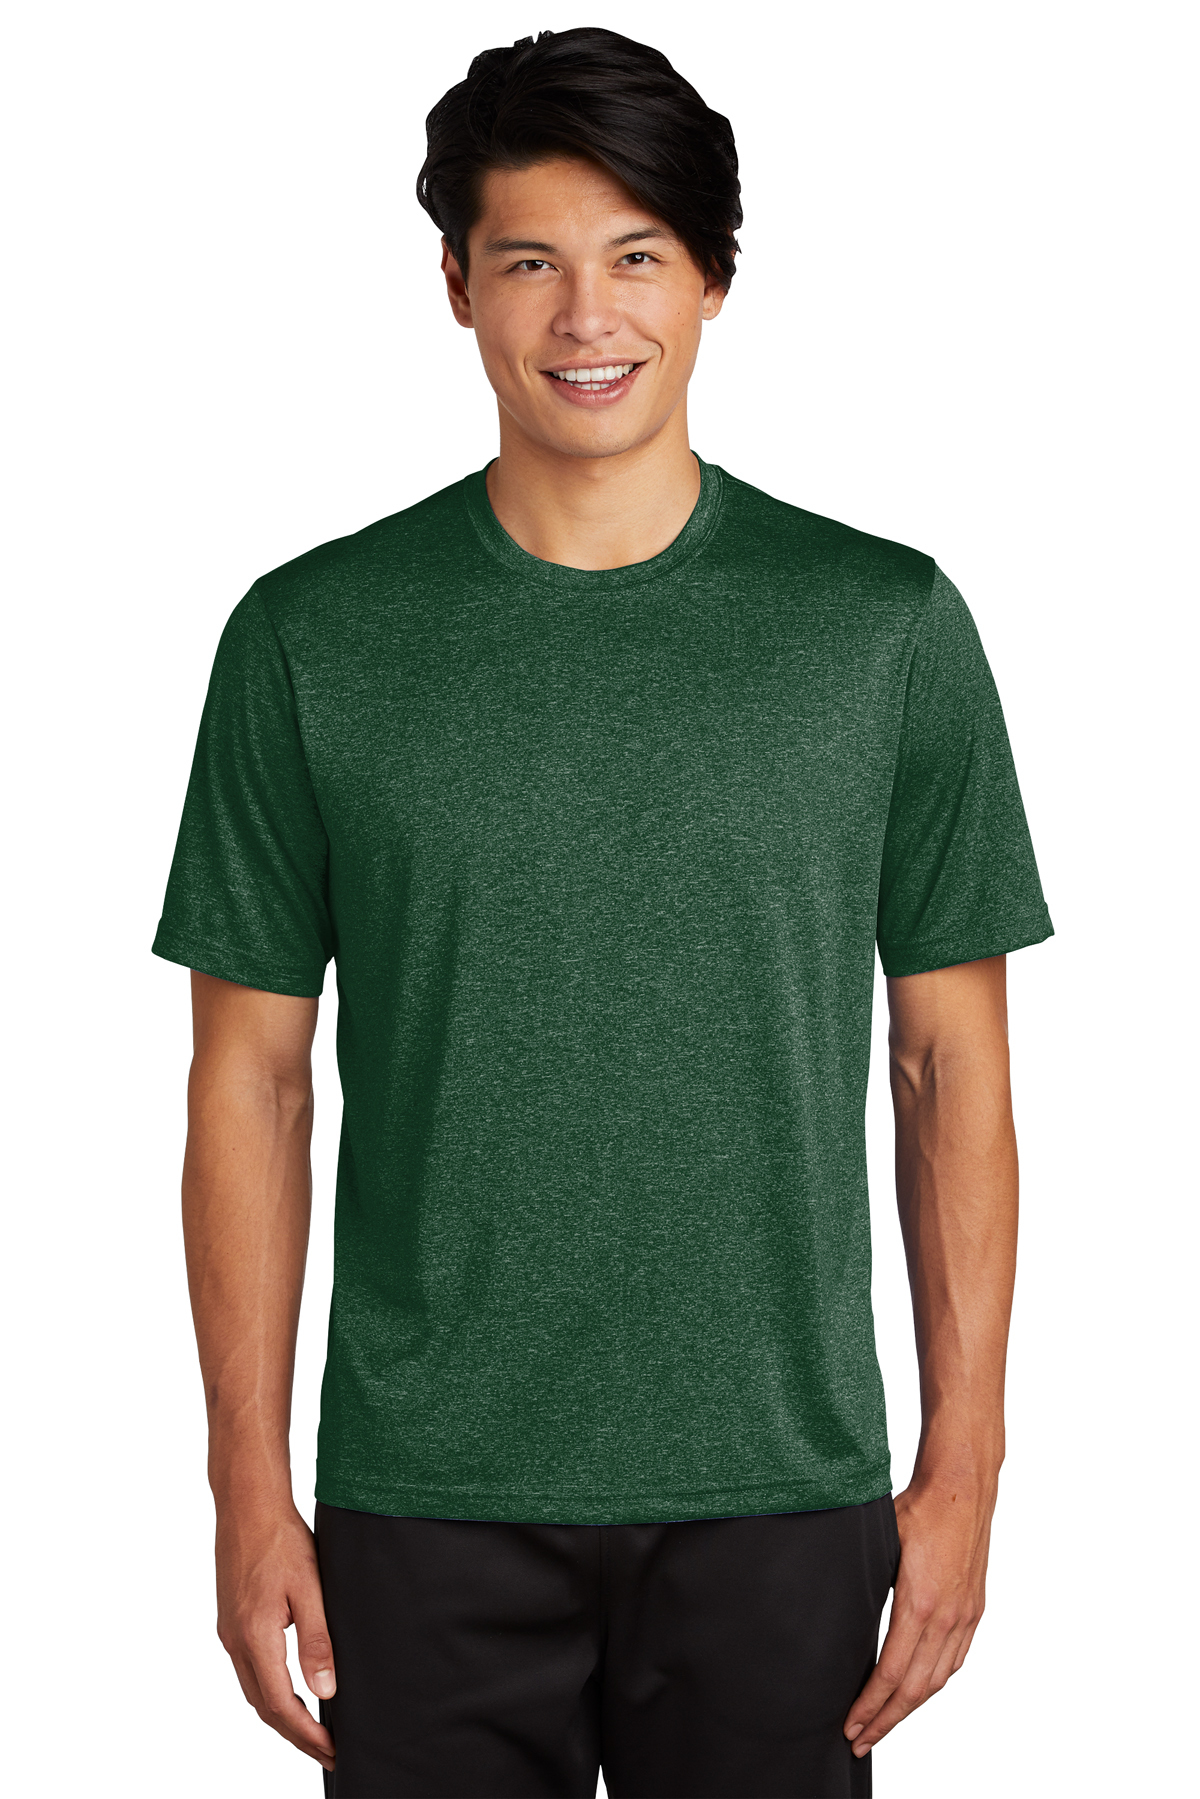 click to view Forest Green Heather